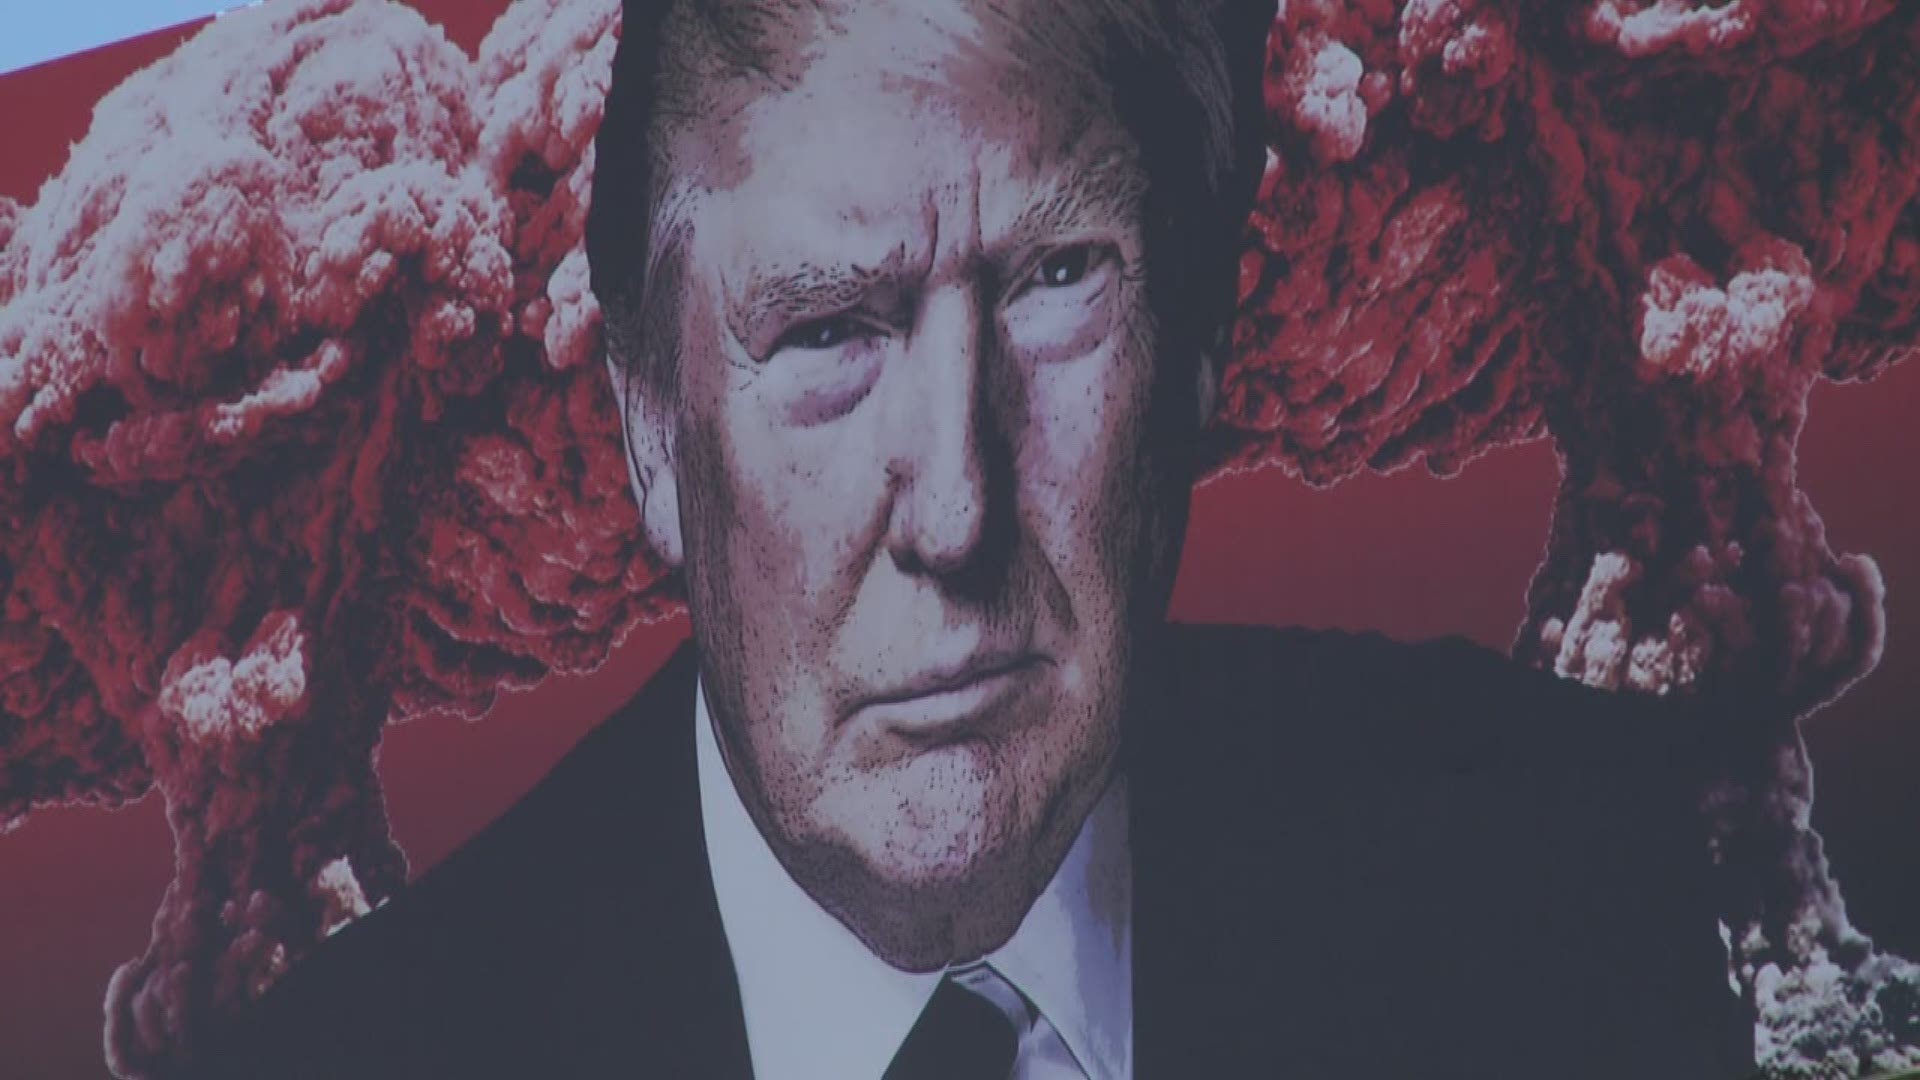 The artist of a billboard that shows the president flanked by mushroom clouds and swastika-like dollar signs has received death threats.